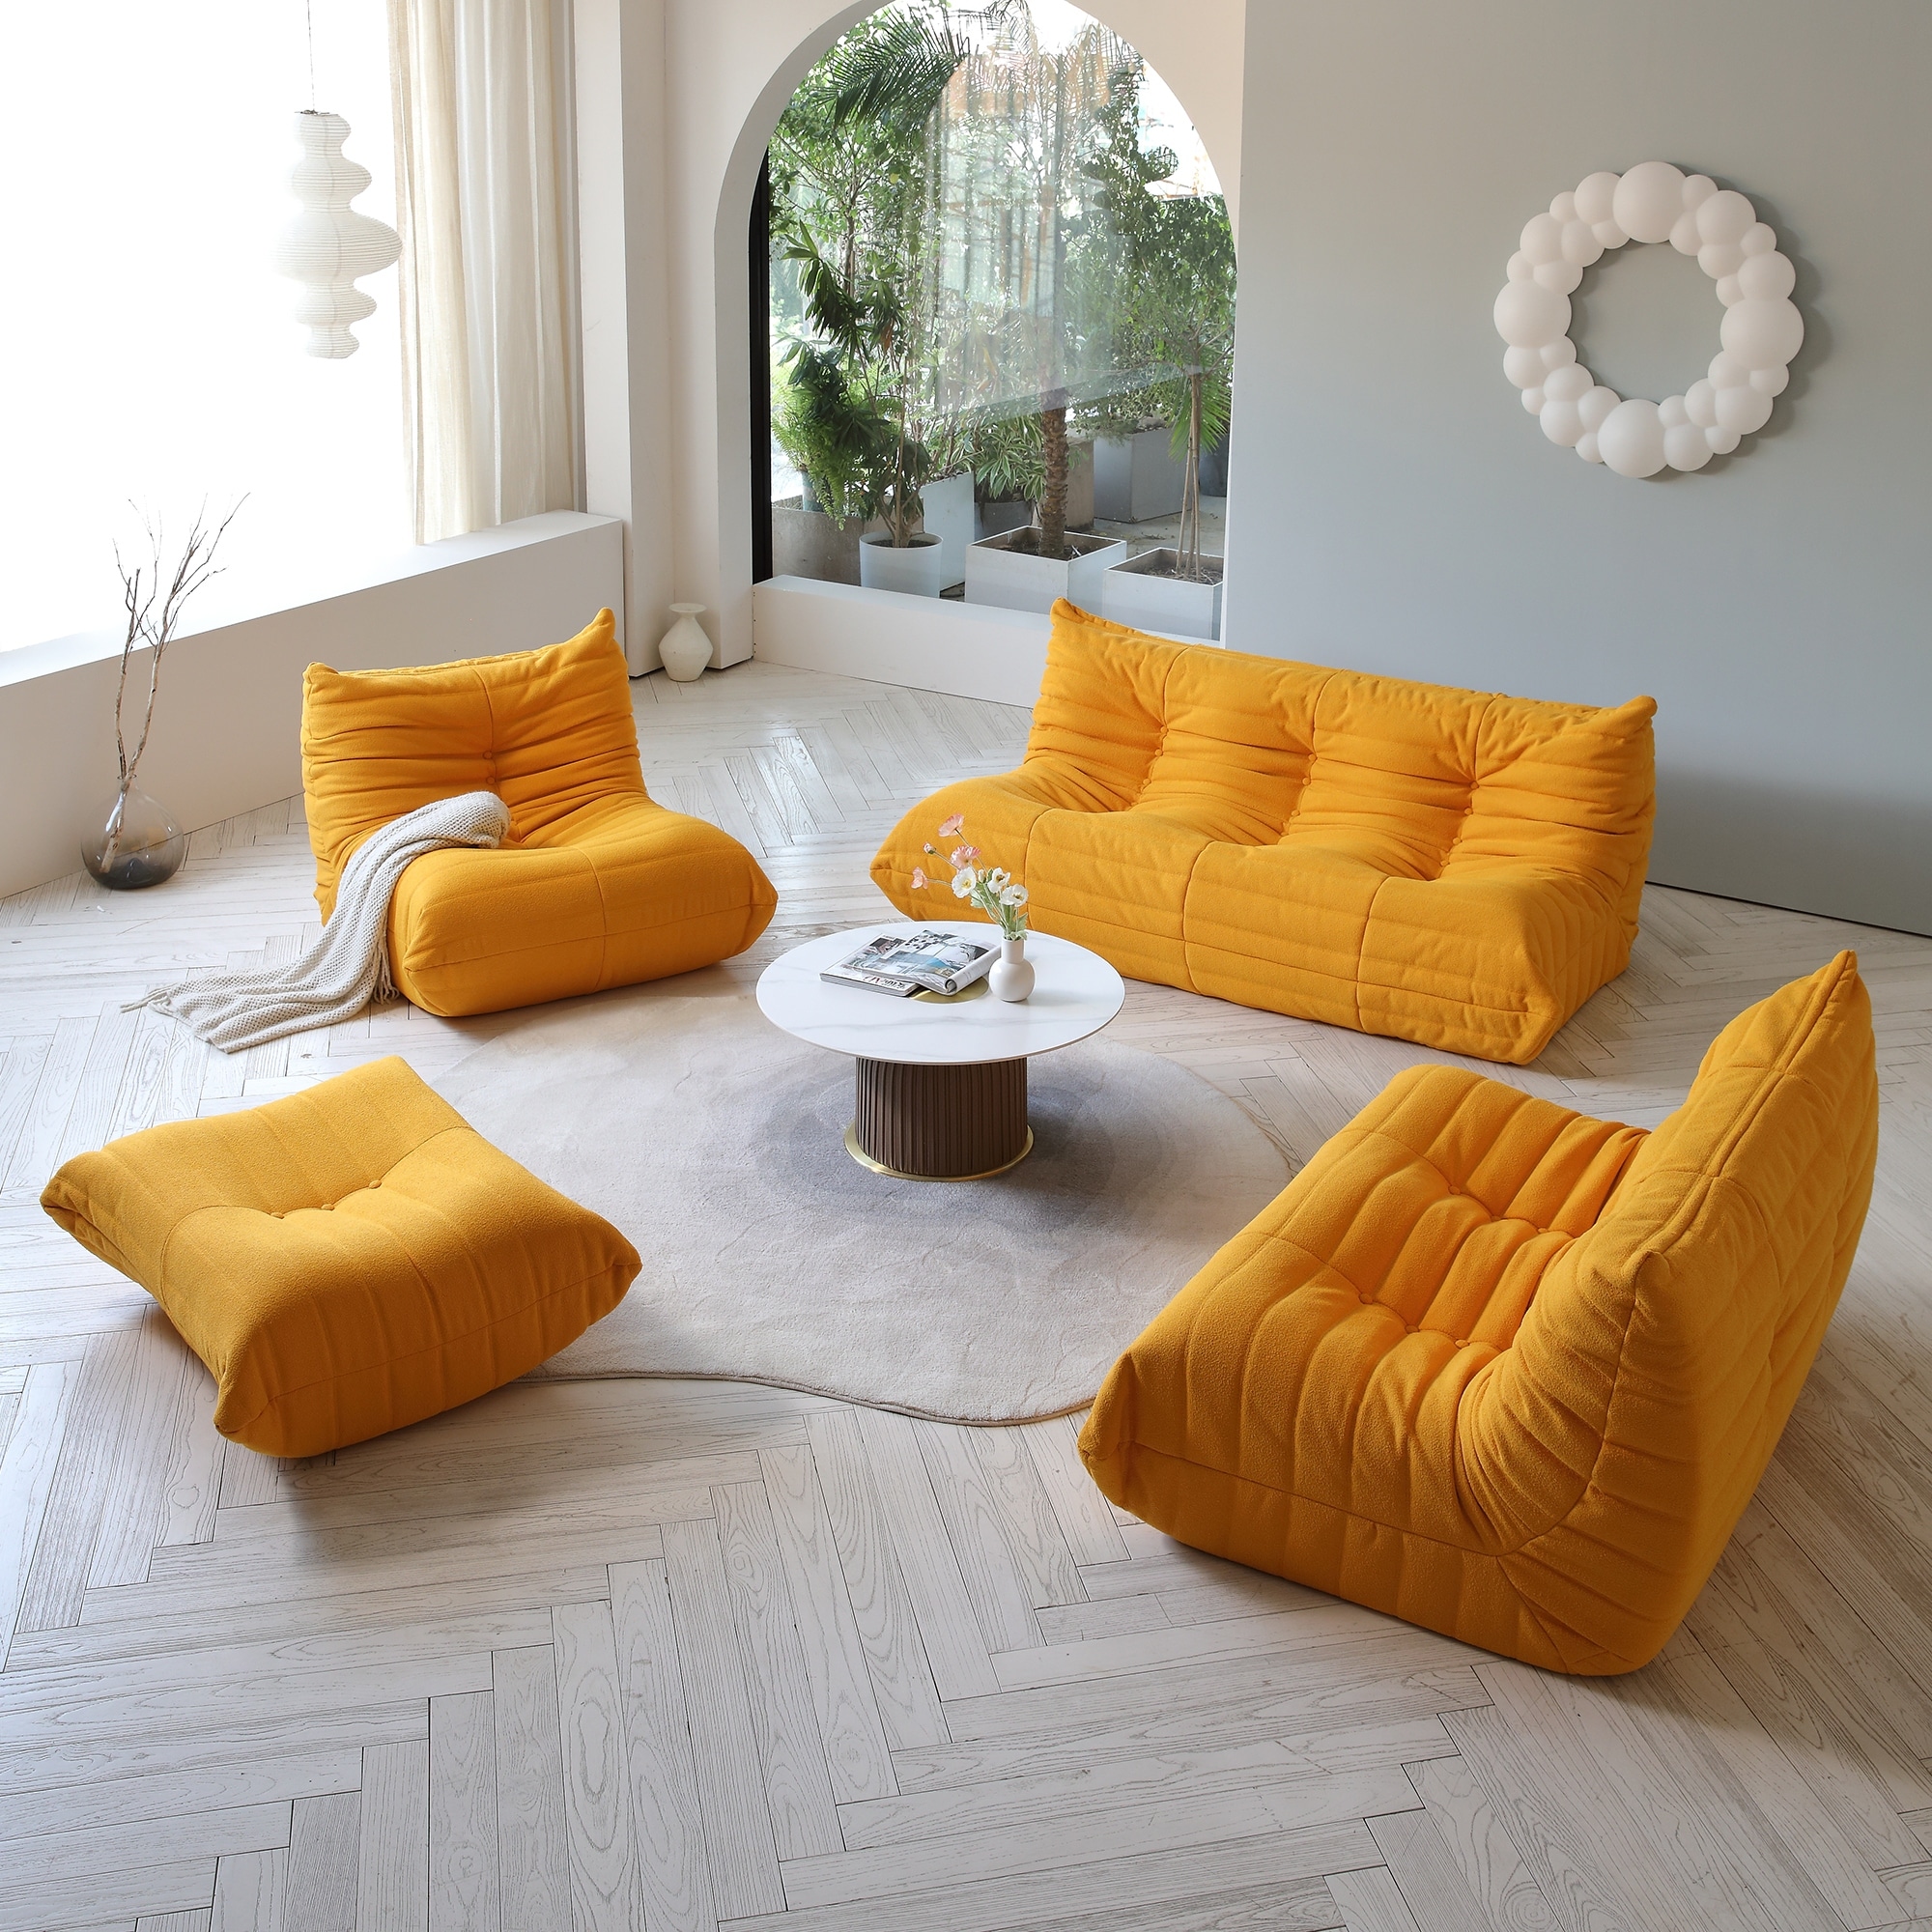 https://ak1.ostkcdn.com/images/products/is/images/direct/71db1ad2bdda658170b06342f71ea0e45f06cdc5/Bean-Bag-Chair%2CErgonomic-Design-Lazy-Sofa-Comfortable-Floor-Couch-Sets.jpg